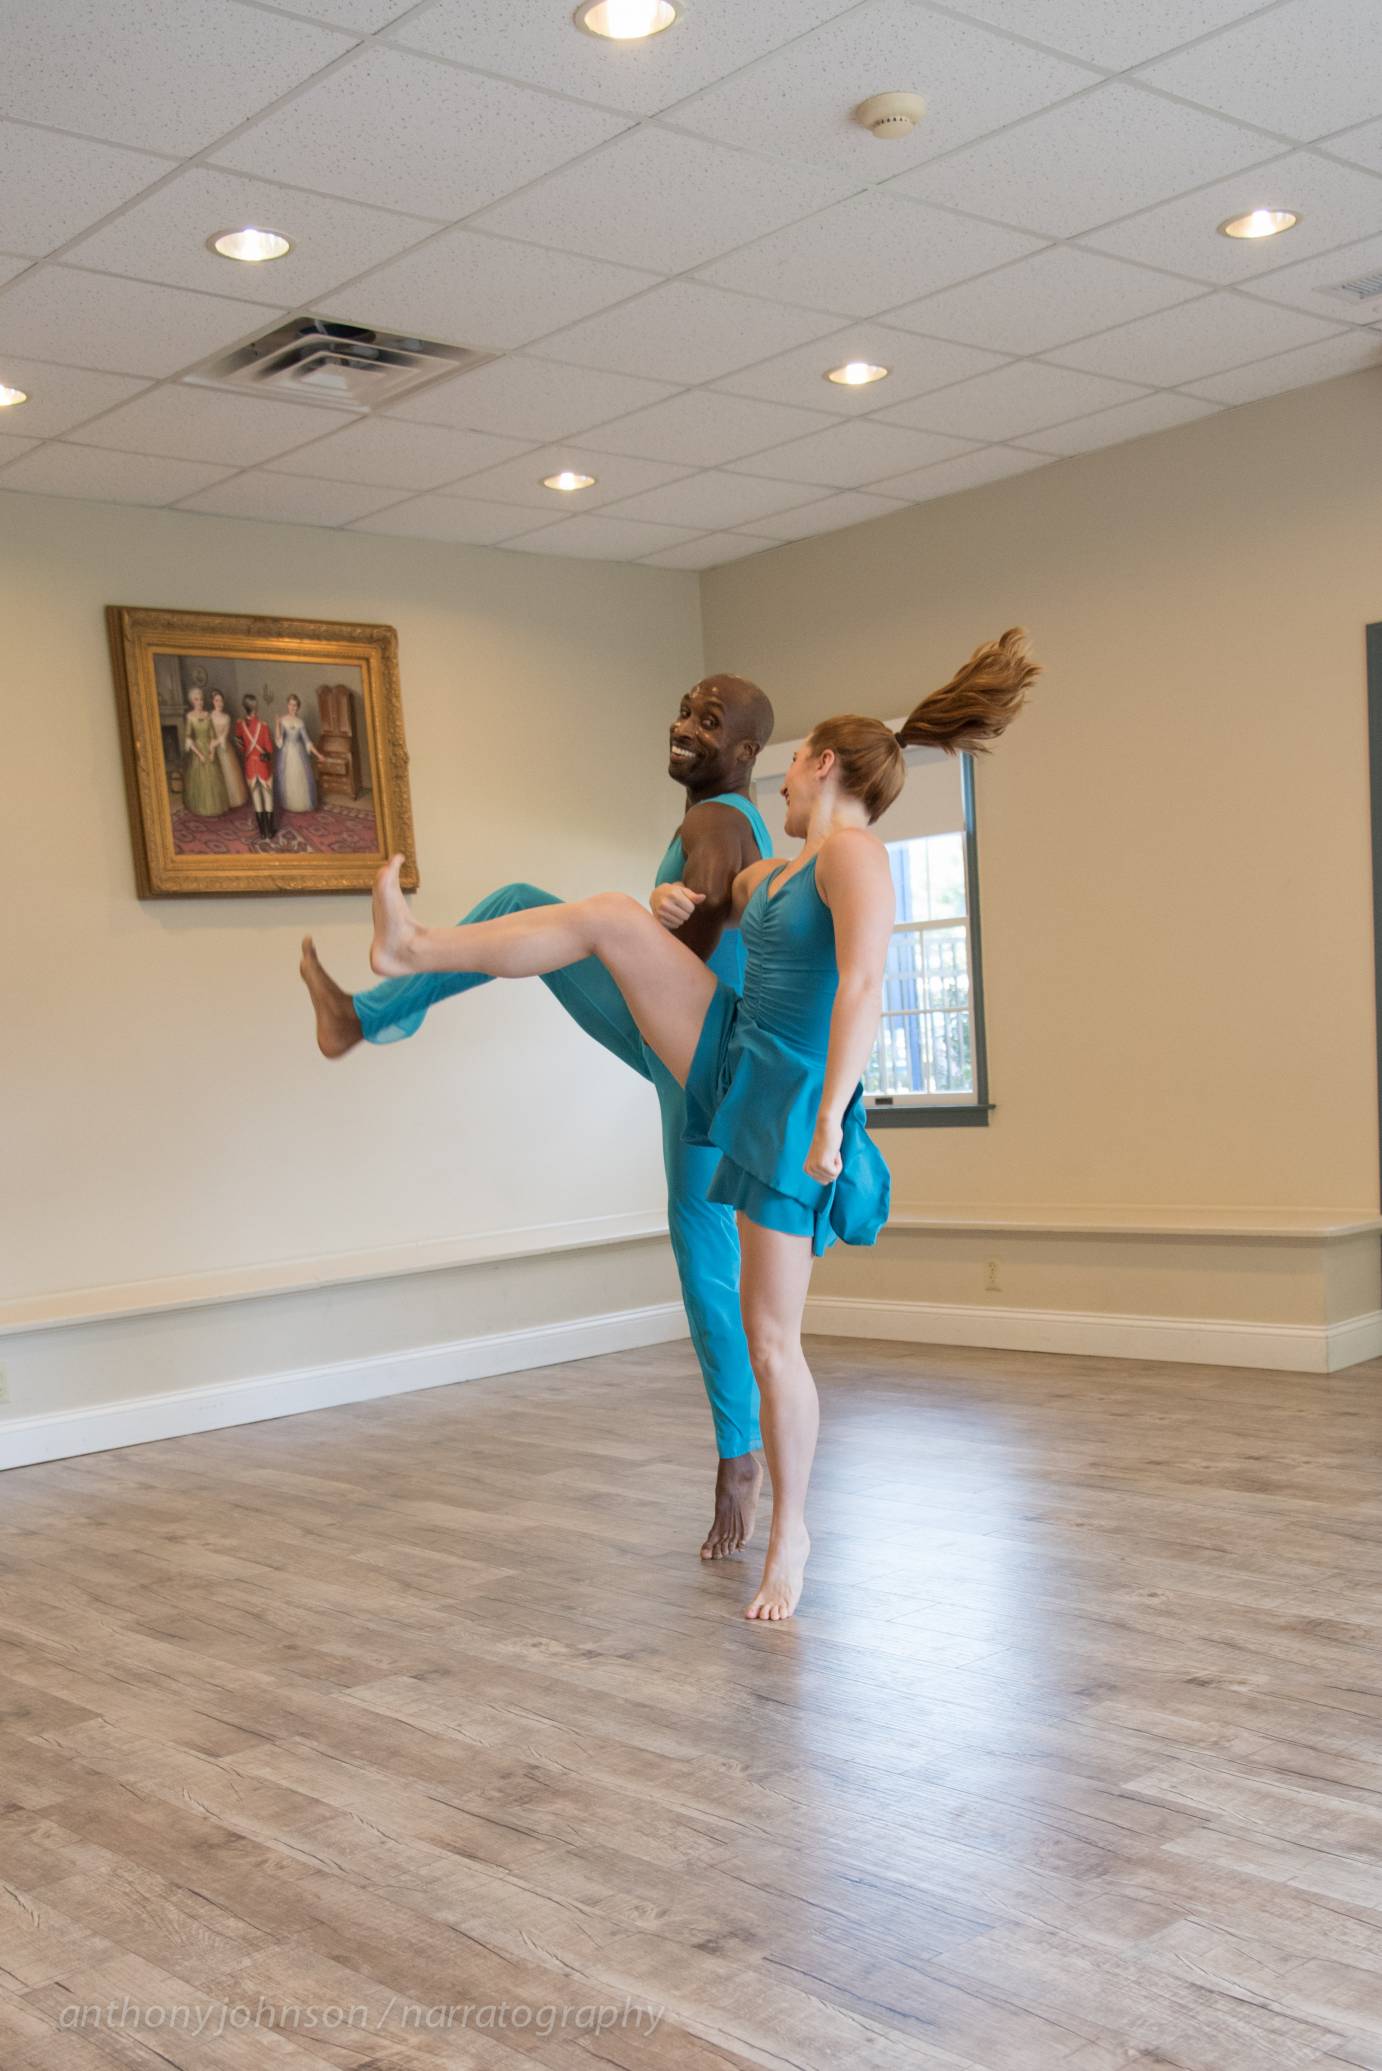 Two dancers perform in a stark gallery space. They wear bright blue costumes as they smile at one another.